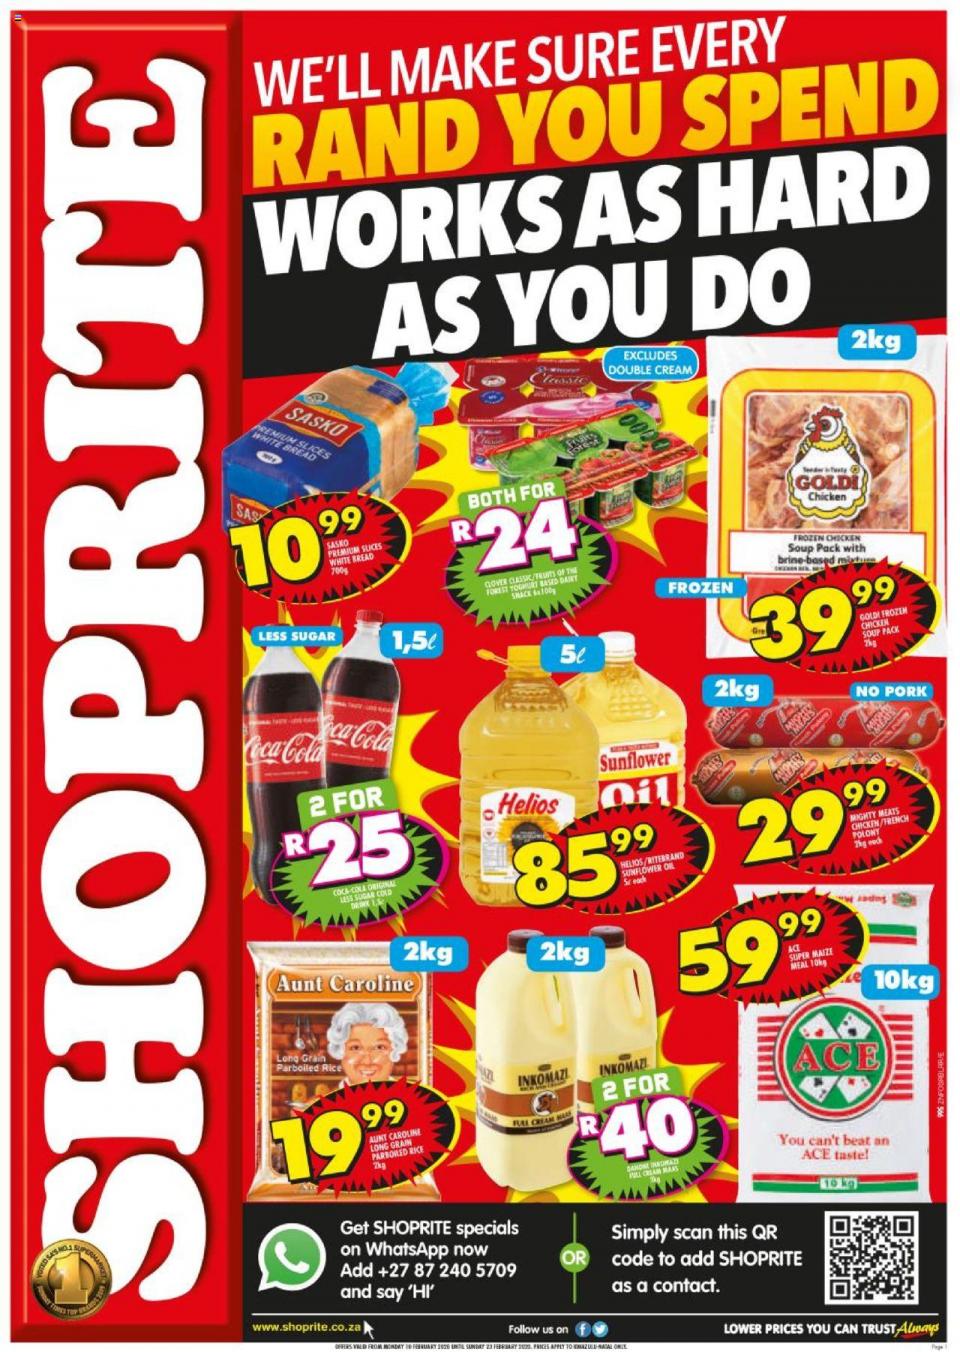 Shoprite Specials Hustle Promotion 10 February 2020